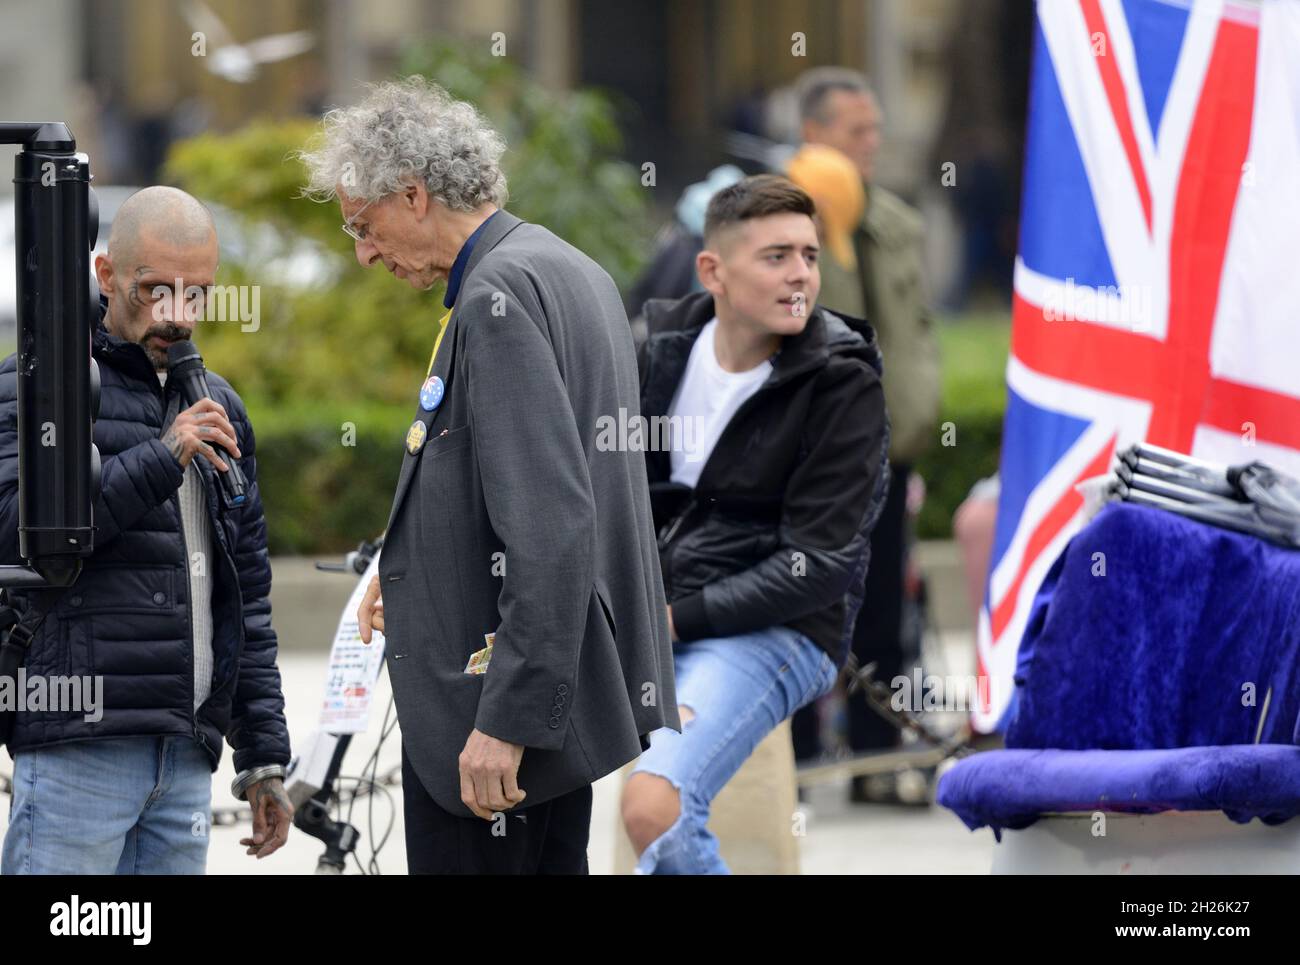 Piers Corbyn (brother of former Labour leader Jeremy) weather forecaster, businessman, activist, anti-vaxxer and conspiracy theorist - campaigning aga Stock Photo